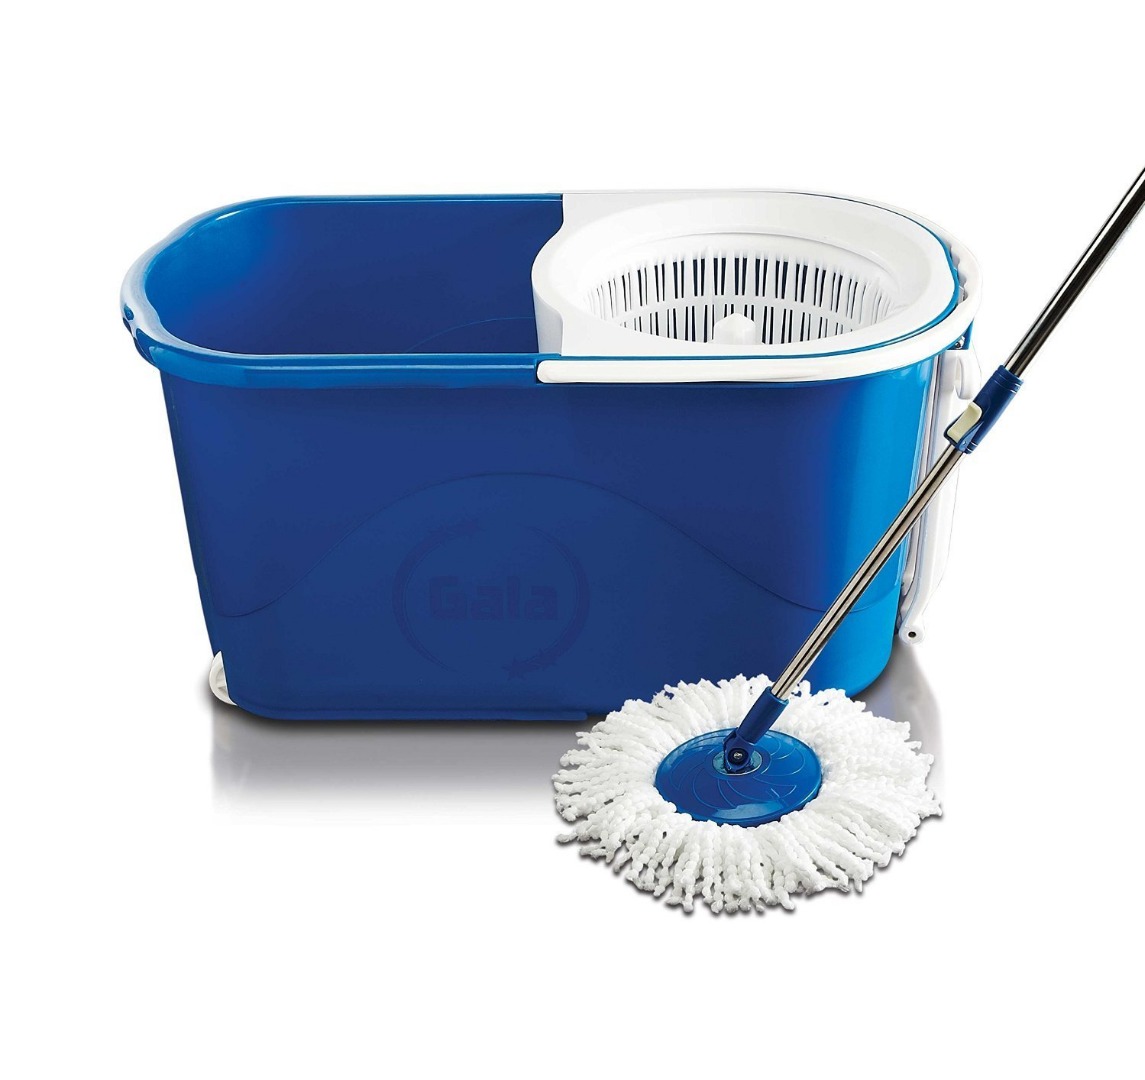 Gala Spin mop with easy wheels and bucket for magic 360 degree cleaning